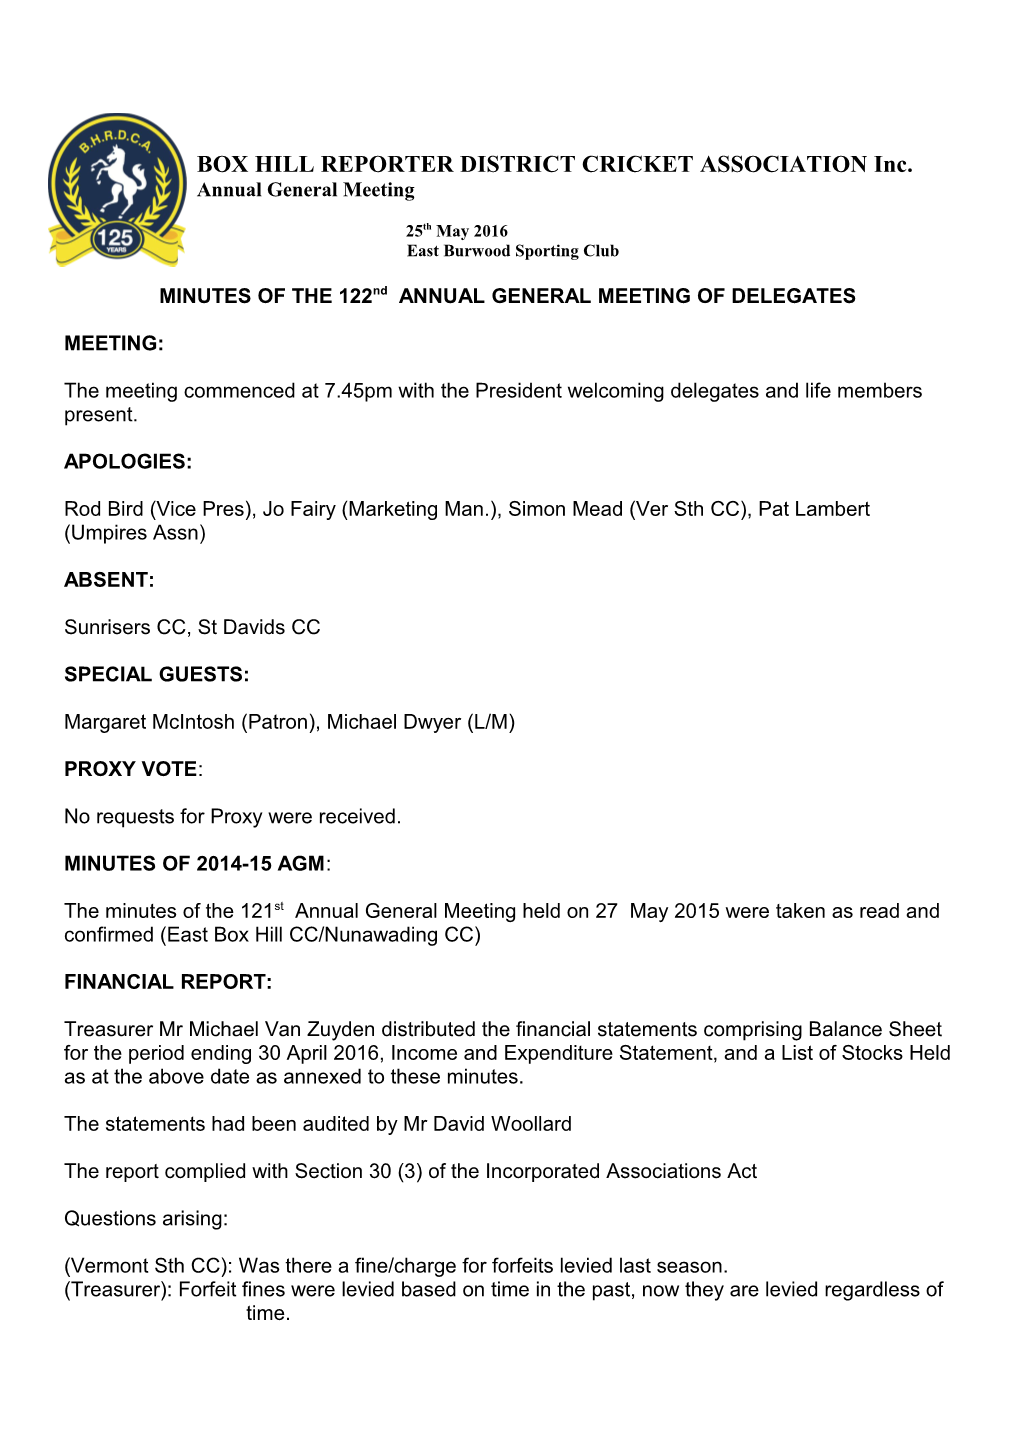 MINUTES of the 122Nd ANNUAL GENERAL MEETING of DELEGATES